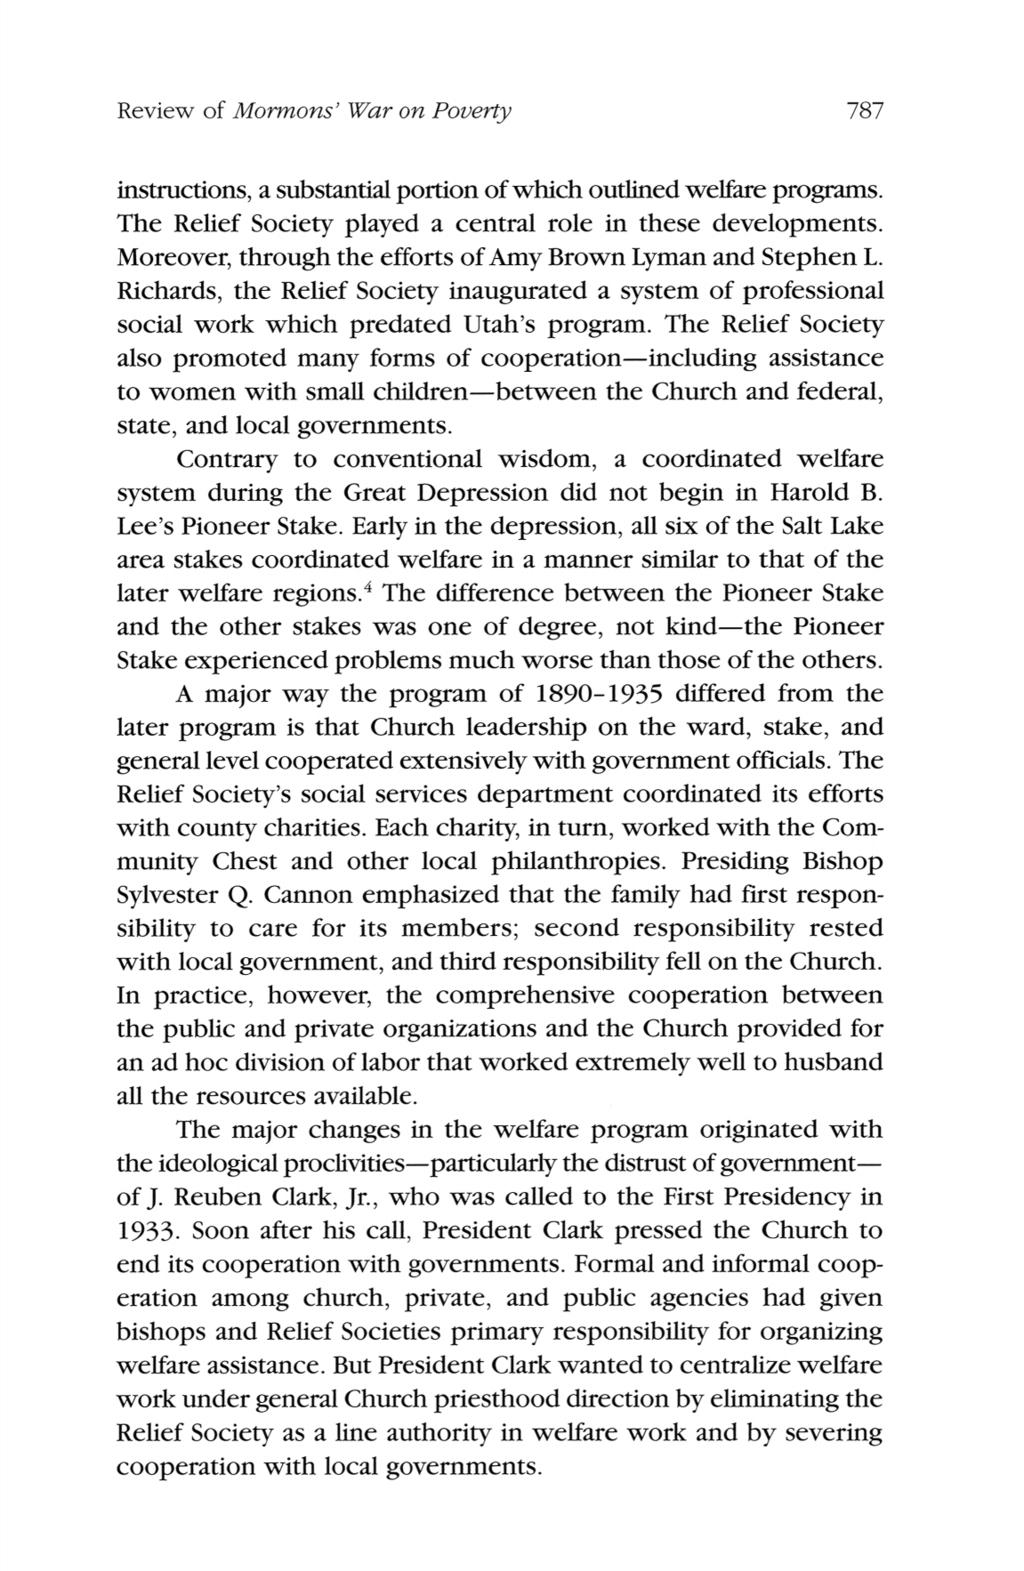 review of mormons cormons Mormons war on poverty 787 instructions a substantial portion of which outlined welfare programs the relief society played a central role in these developments moreover